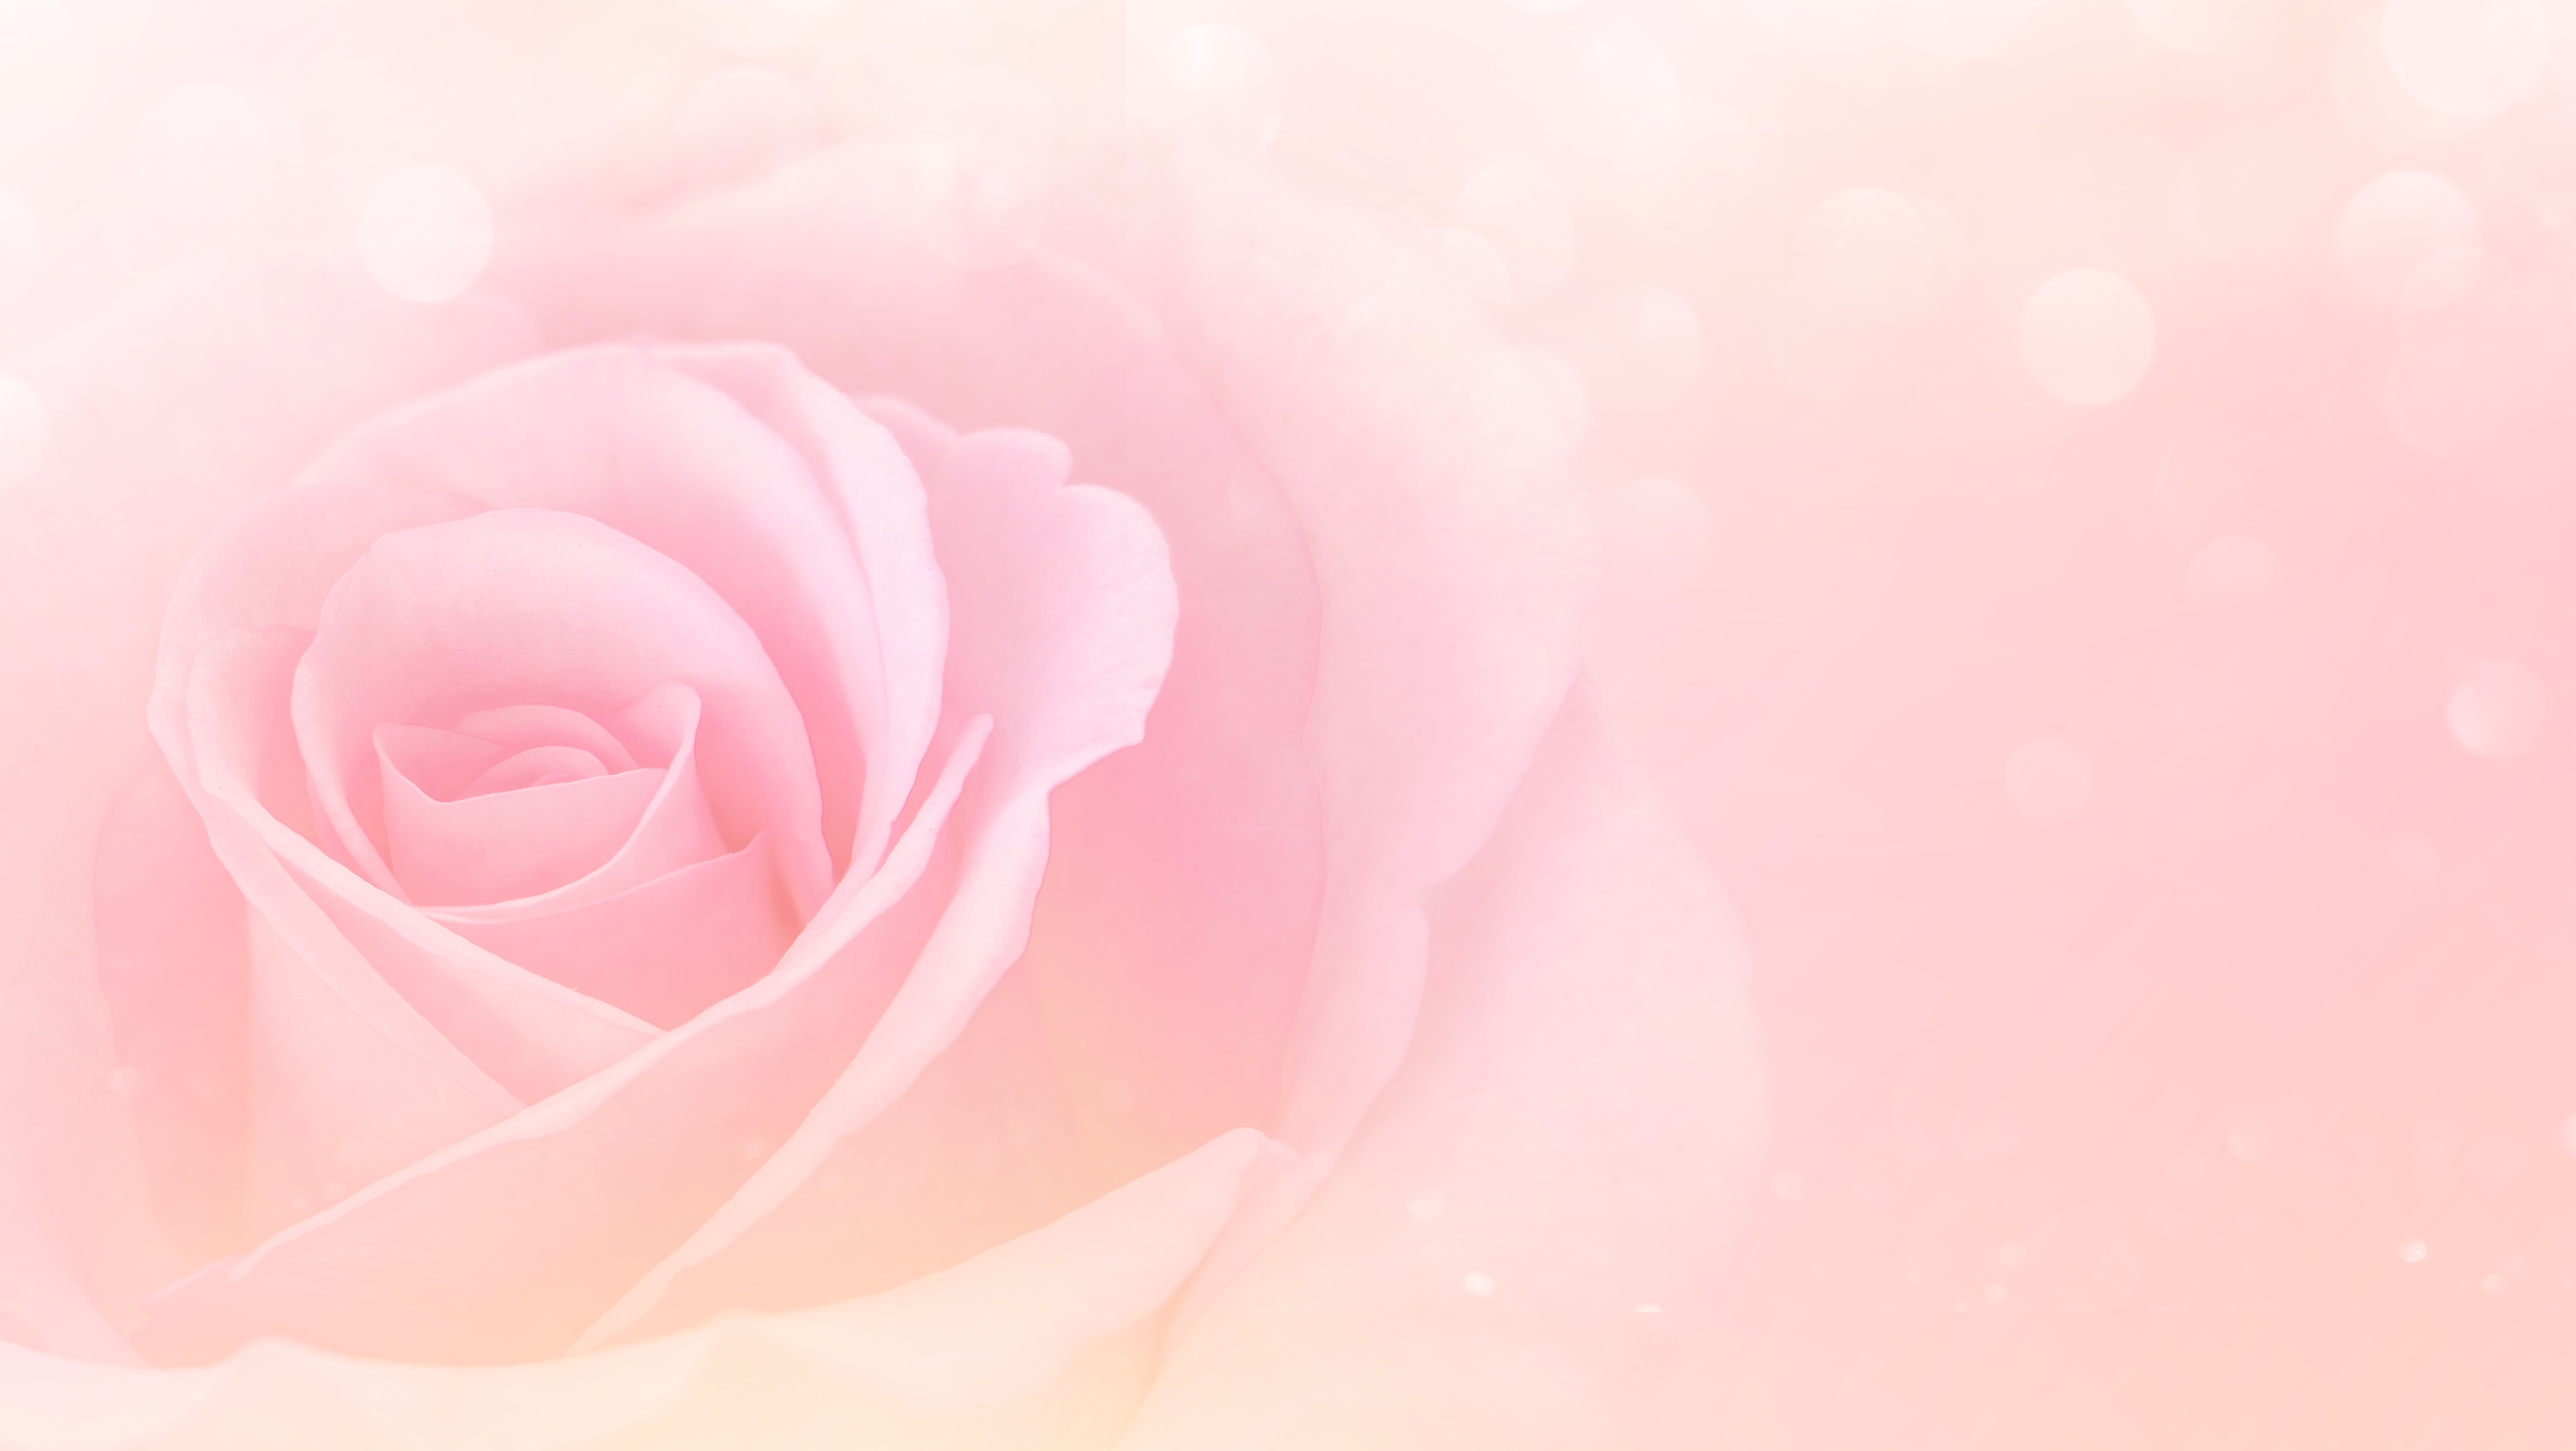 Valentines day and wedding Pink Rose background